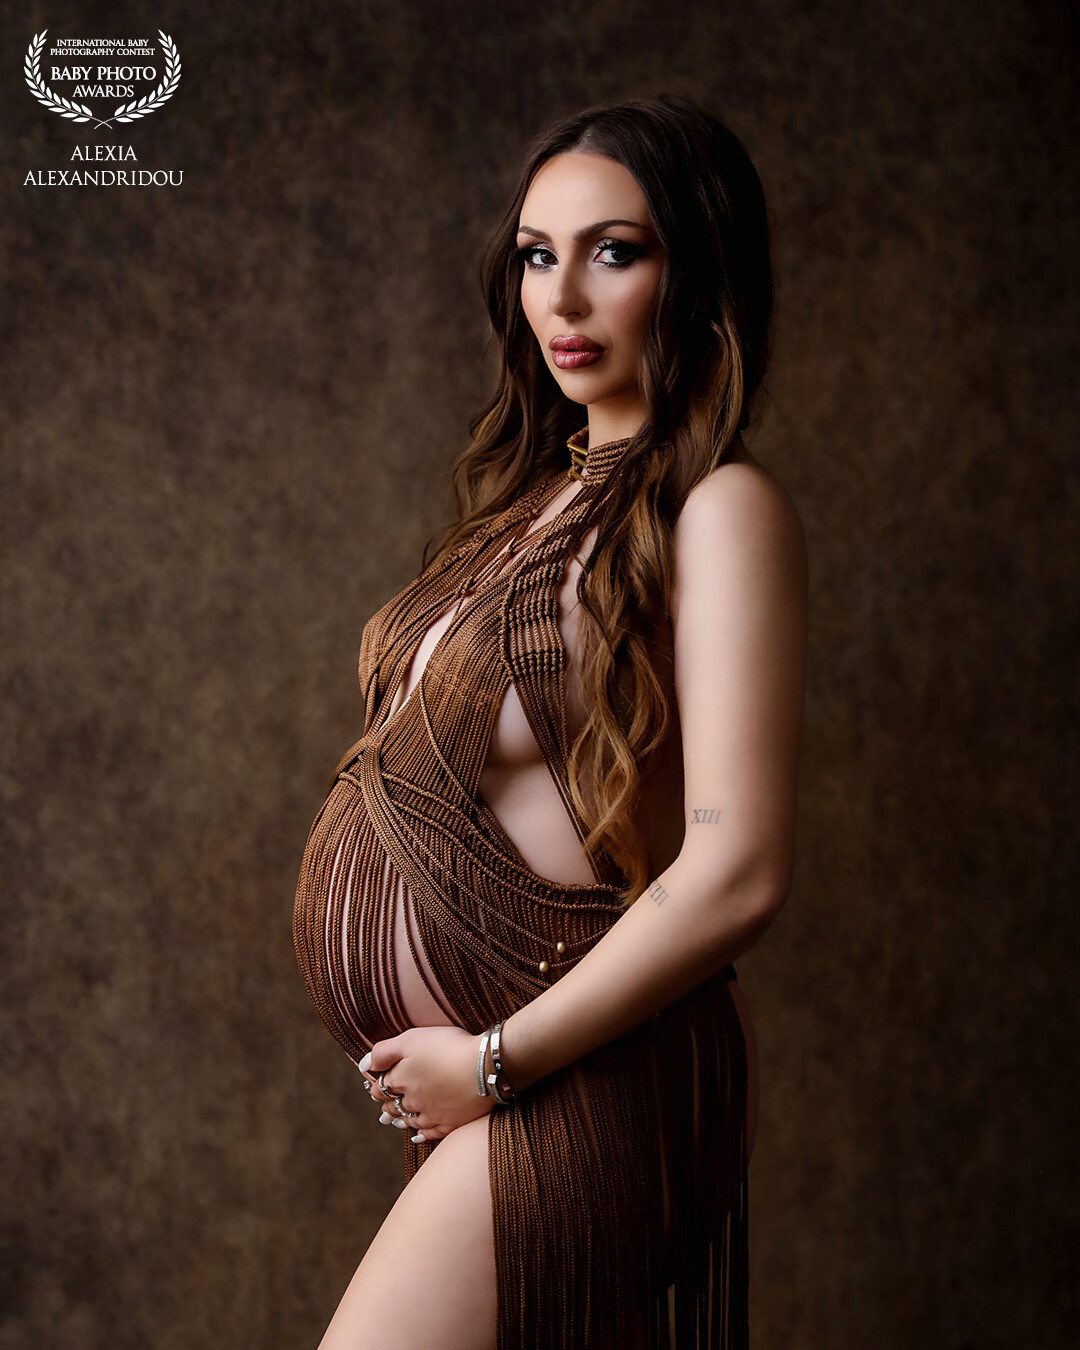 In a world where strength, beauty, and the miracle of life converge, there was a dynamic woman embracing the journey of motherhood. She radiated confidence, grace, and an undeniable power that inspired those around her. To celebrate this transformative phase of her life, she embarked on a maternity photo session that captured the essence of her unique spirit.